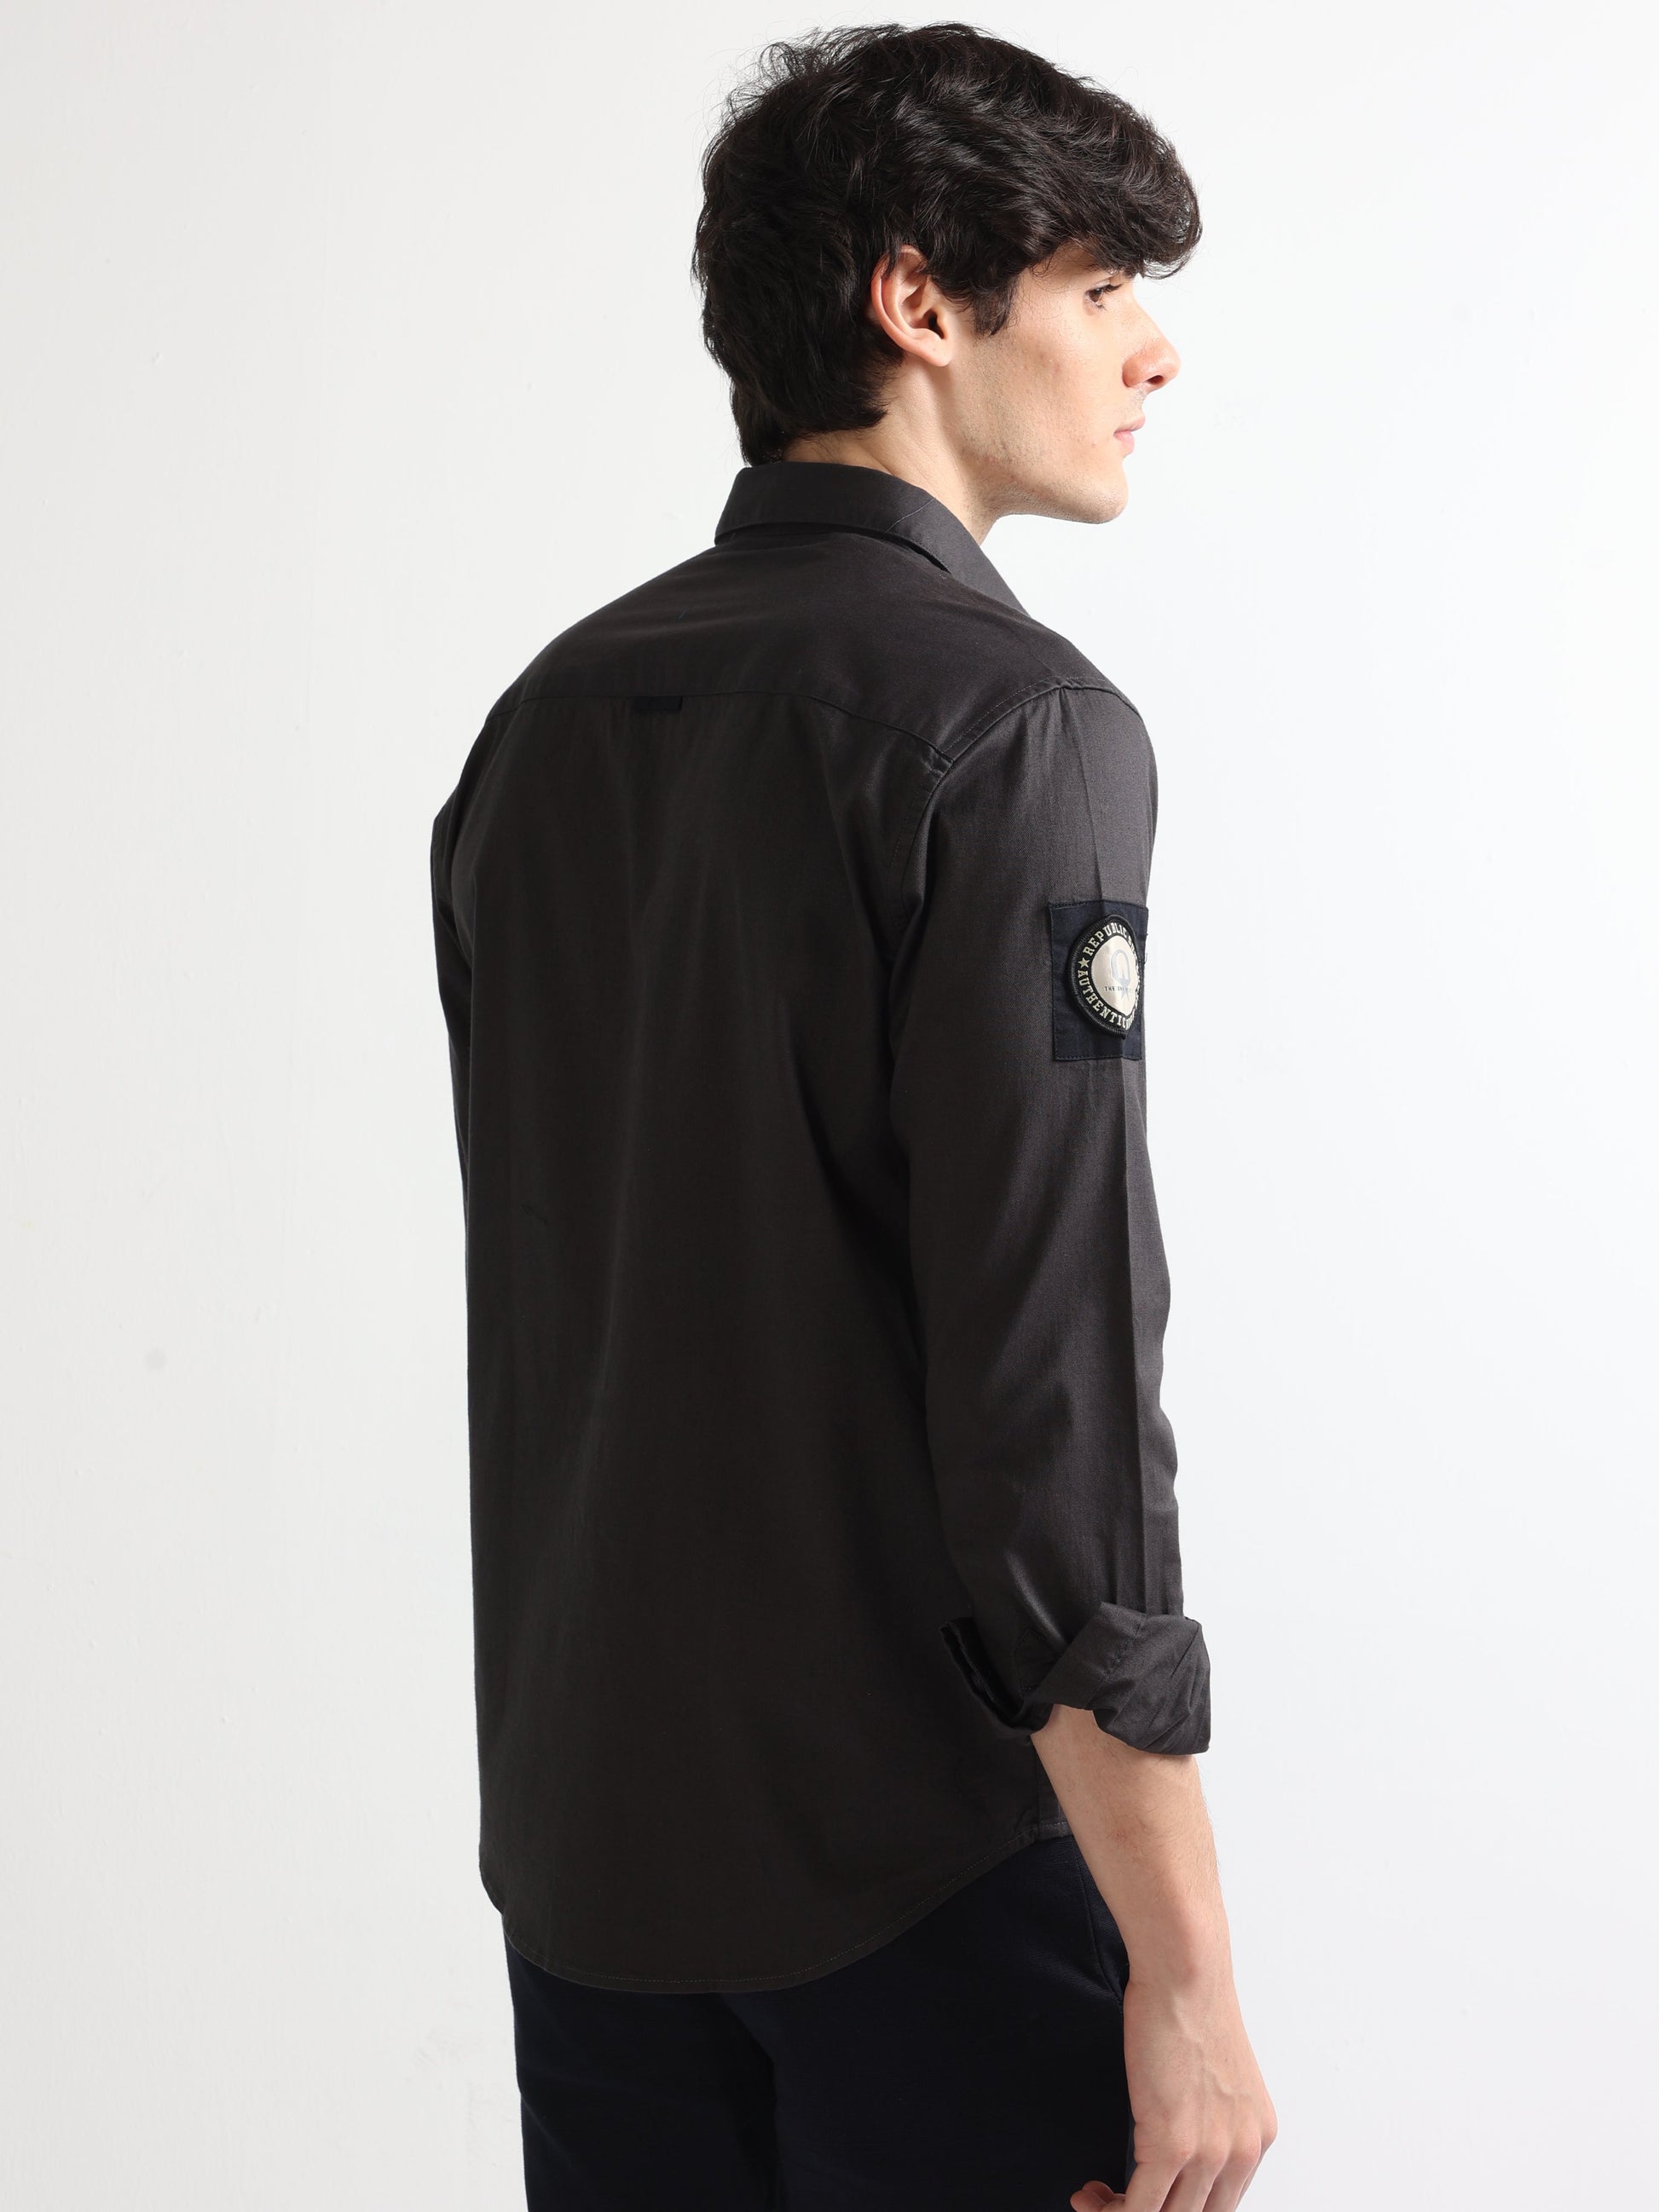 Buy Contrast Stylish Double Pocket Shirt For Mens Online.